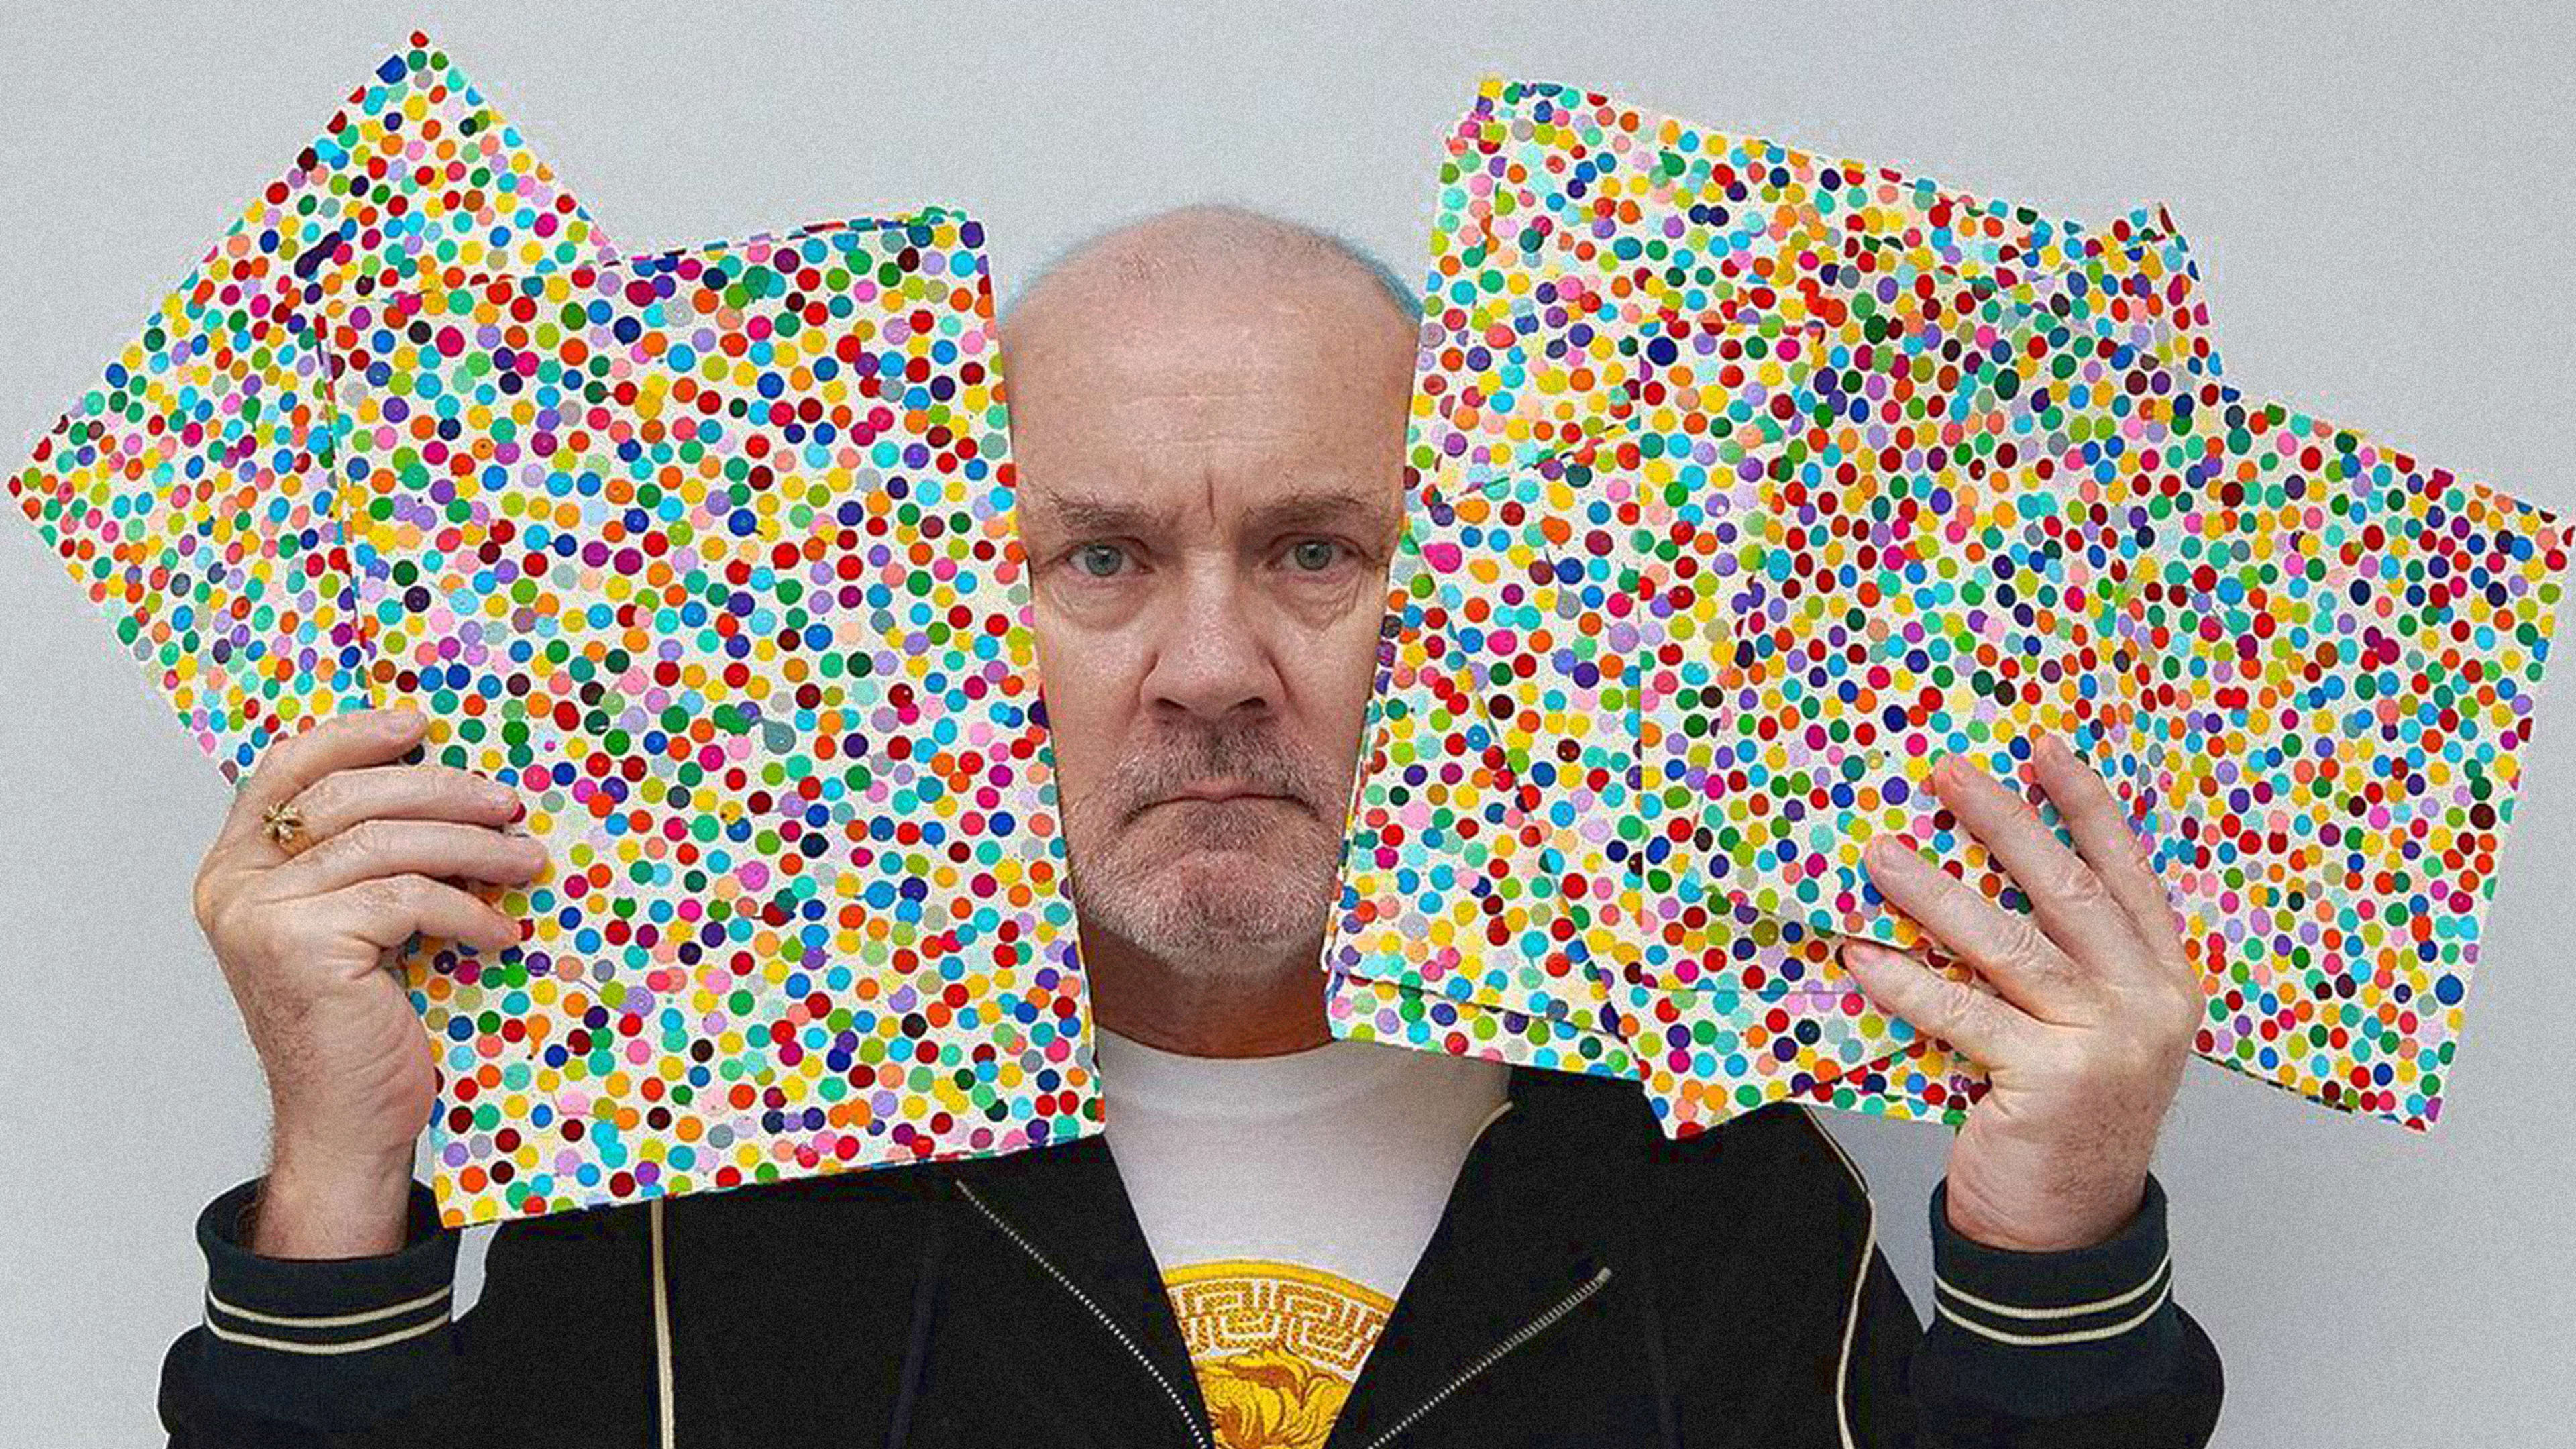 Damien Hirst’s ‘The Currency’ questions everything you thought you knew about art and money